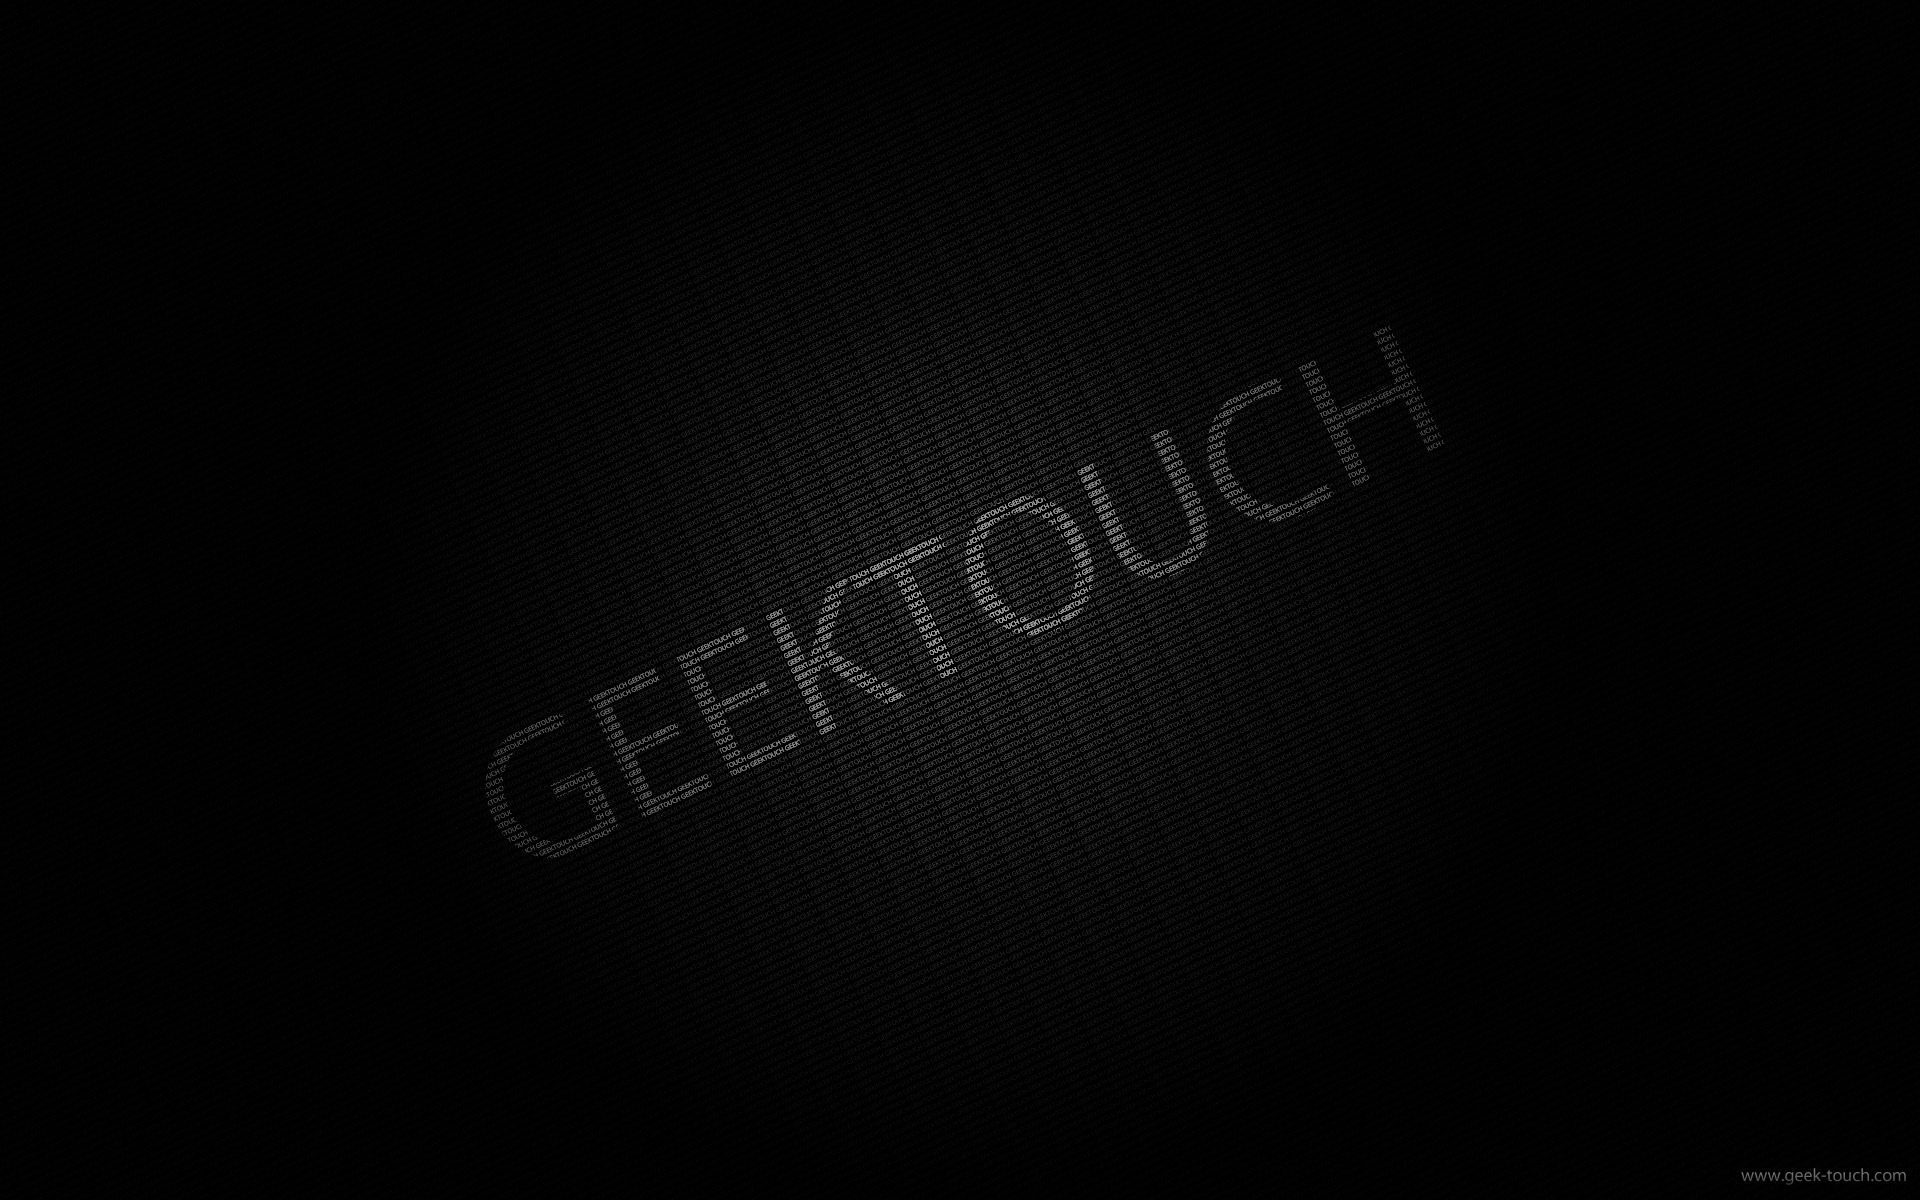 Yet Another Awesome Geek Wallpaper For All Geeks